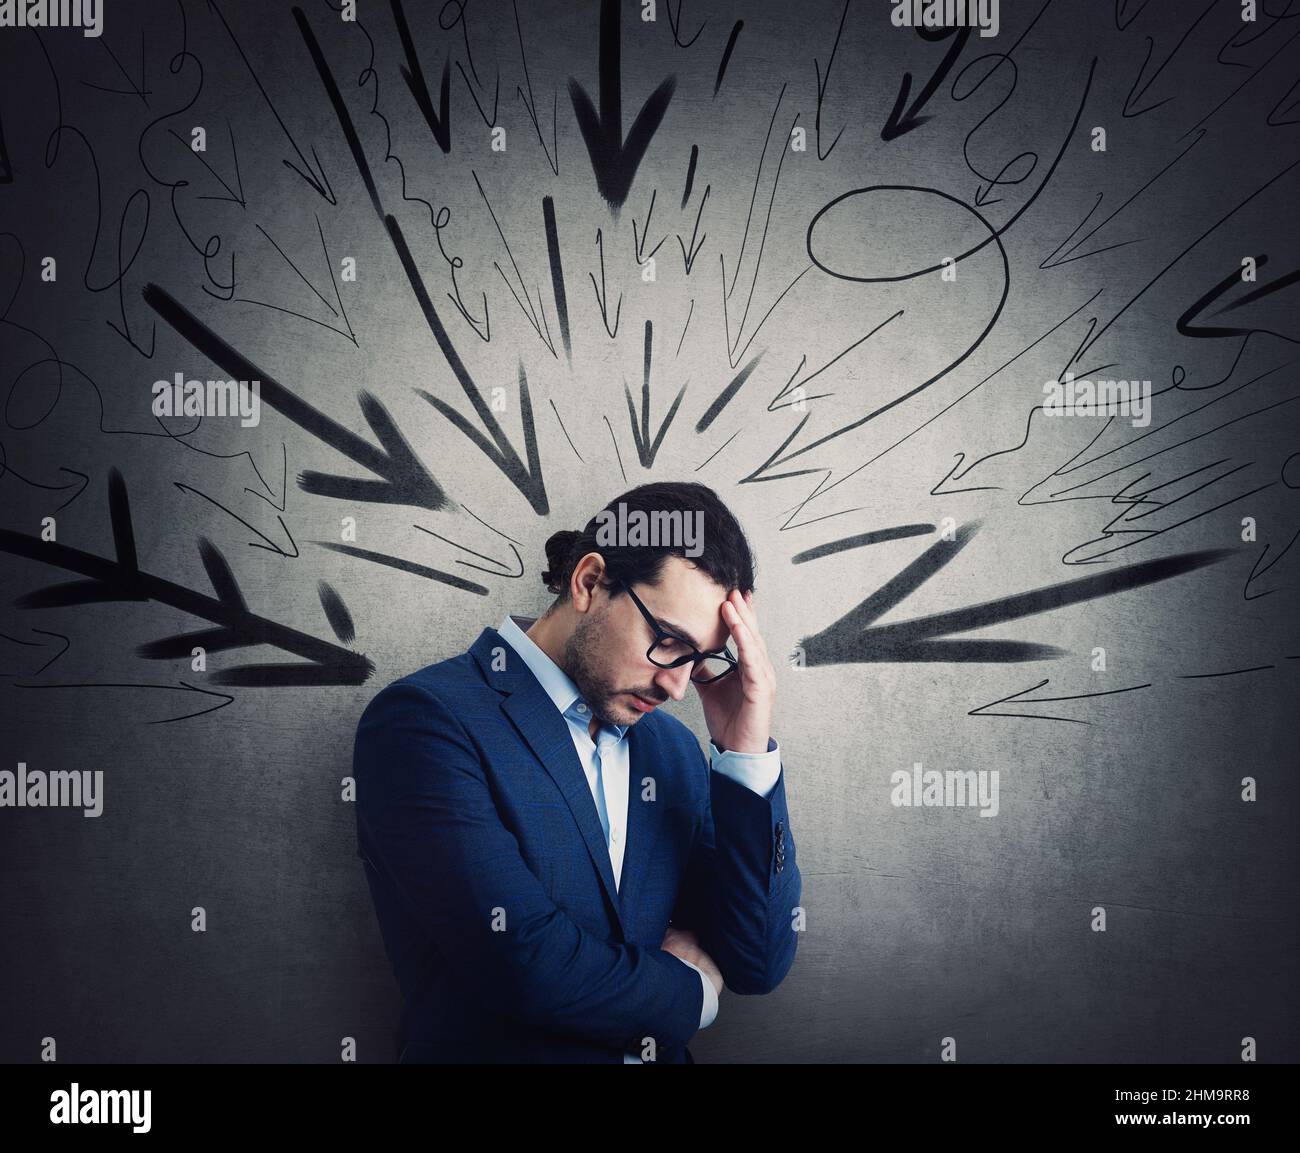 Overwhelmed businessman under pressure suffers headache and anxiety. High tension, dismay concept. Fatigue business person and multiple arrows points Stock Photo